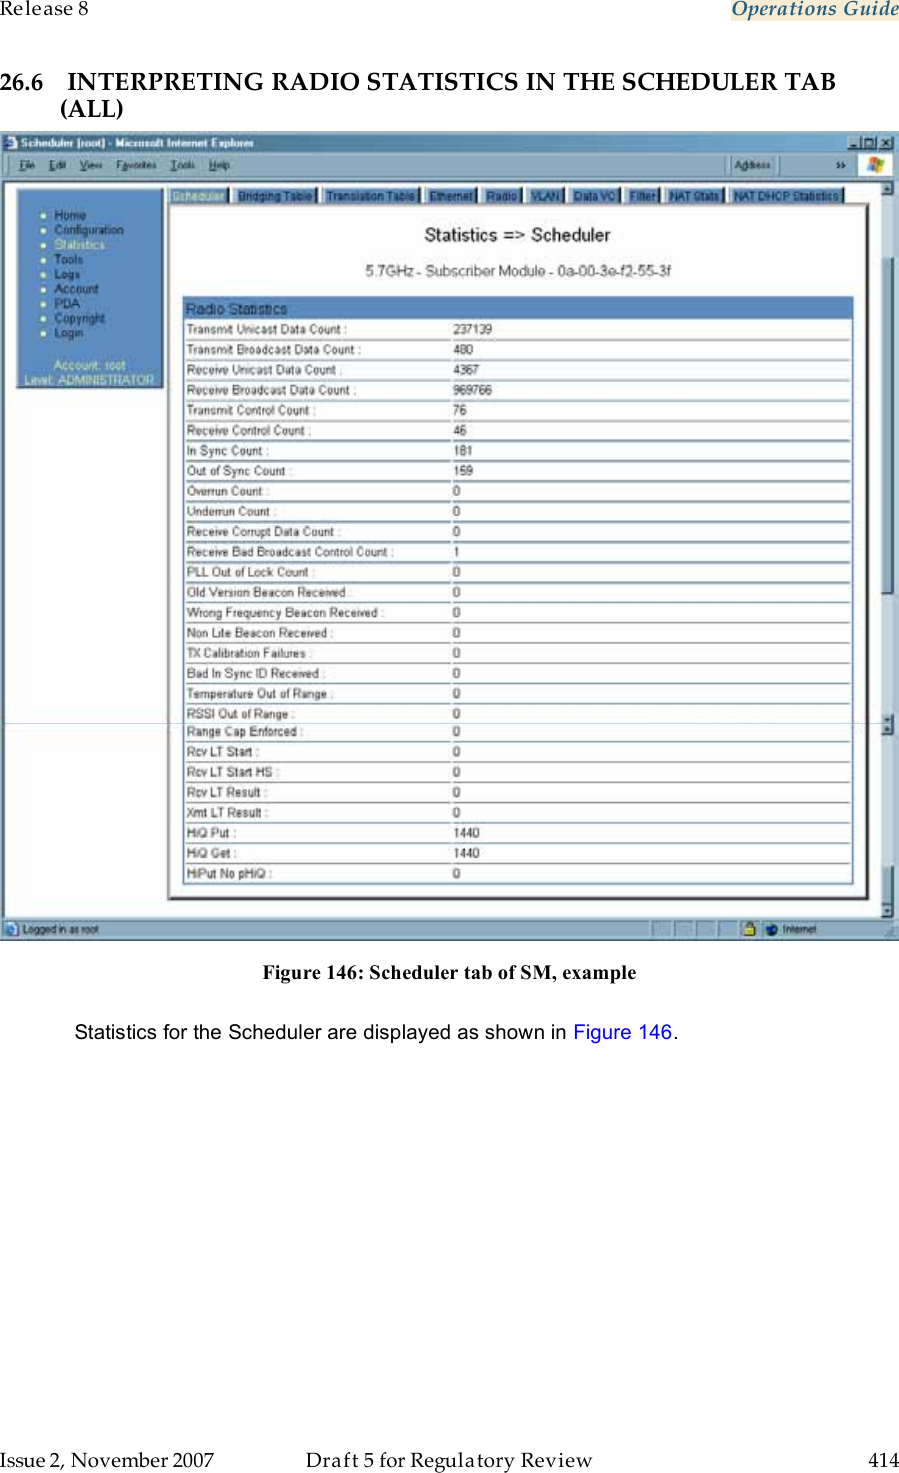 Release 8    Operations Guide   Issue 2, November 2007  Draft 5 for Regulatory Review  414     26.6 INTERPRETING RADIO STATISTICS IN THE SCHEDULER TAB (ALL)  Figure 146: Scheduler tab of SM, example  Statistics for the Scheduler are displayed as shown in Figure 146. 